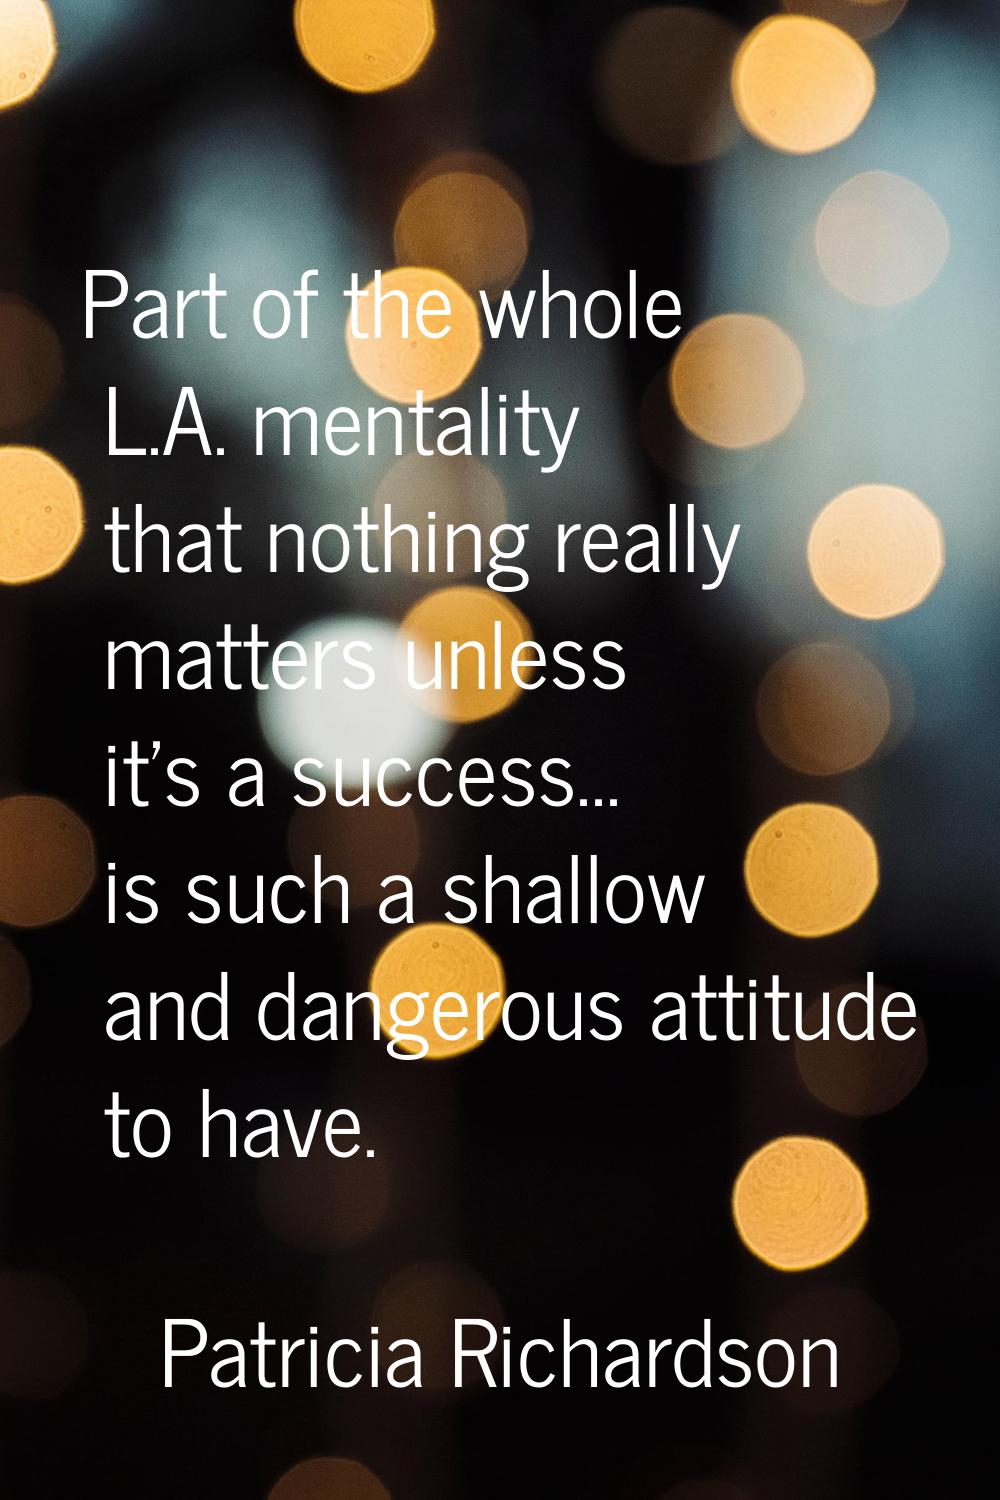 Part of the whole L.A. mentality that nothing really matters unless it's a success... is such a sha